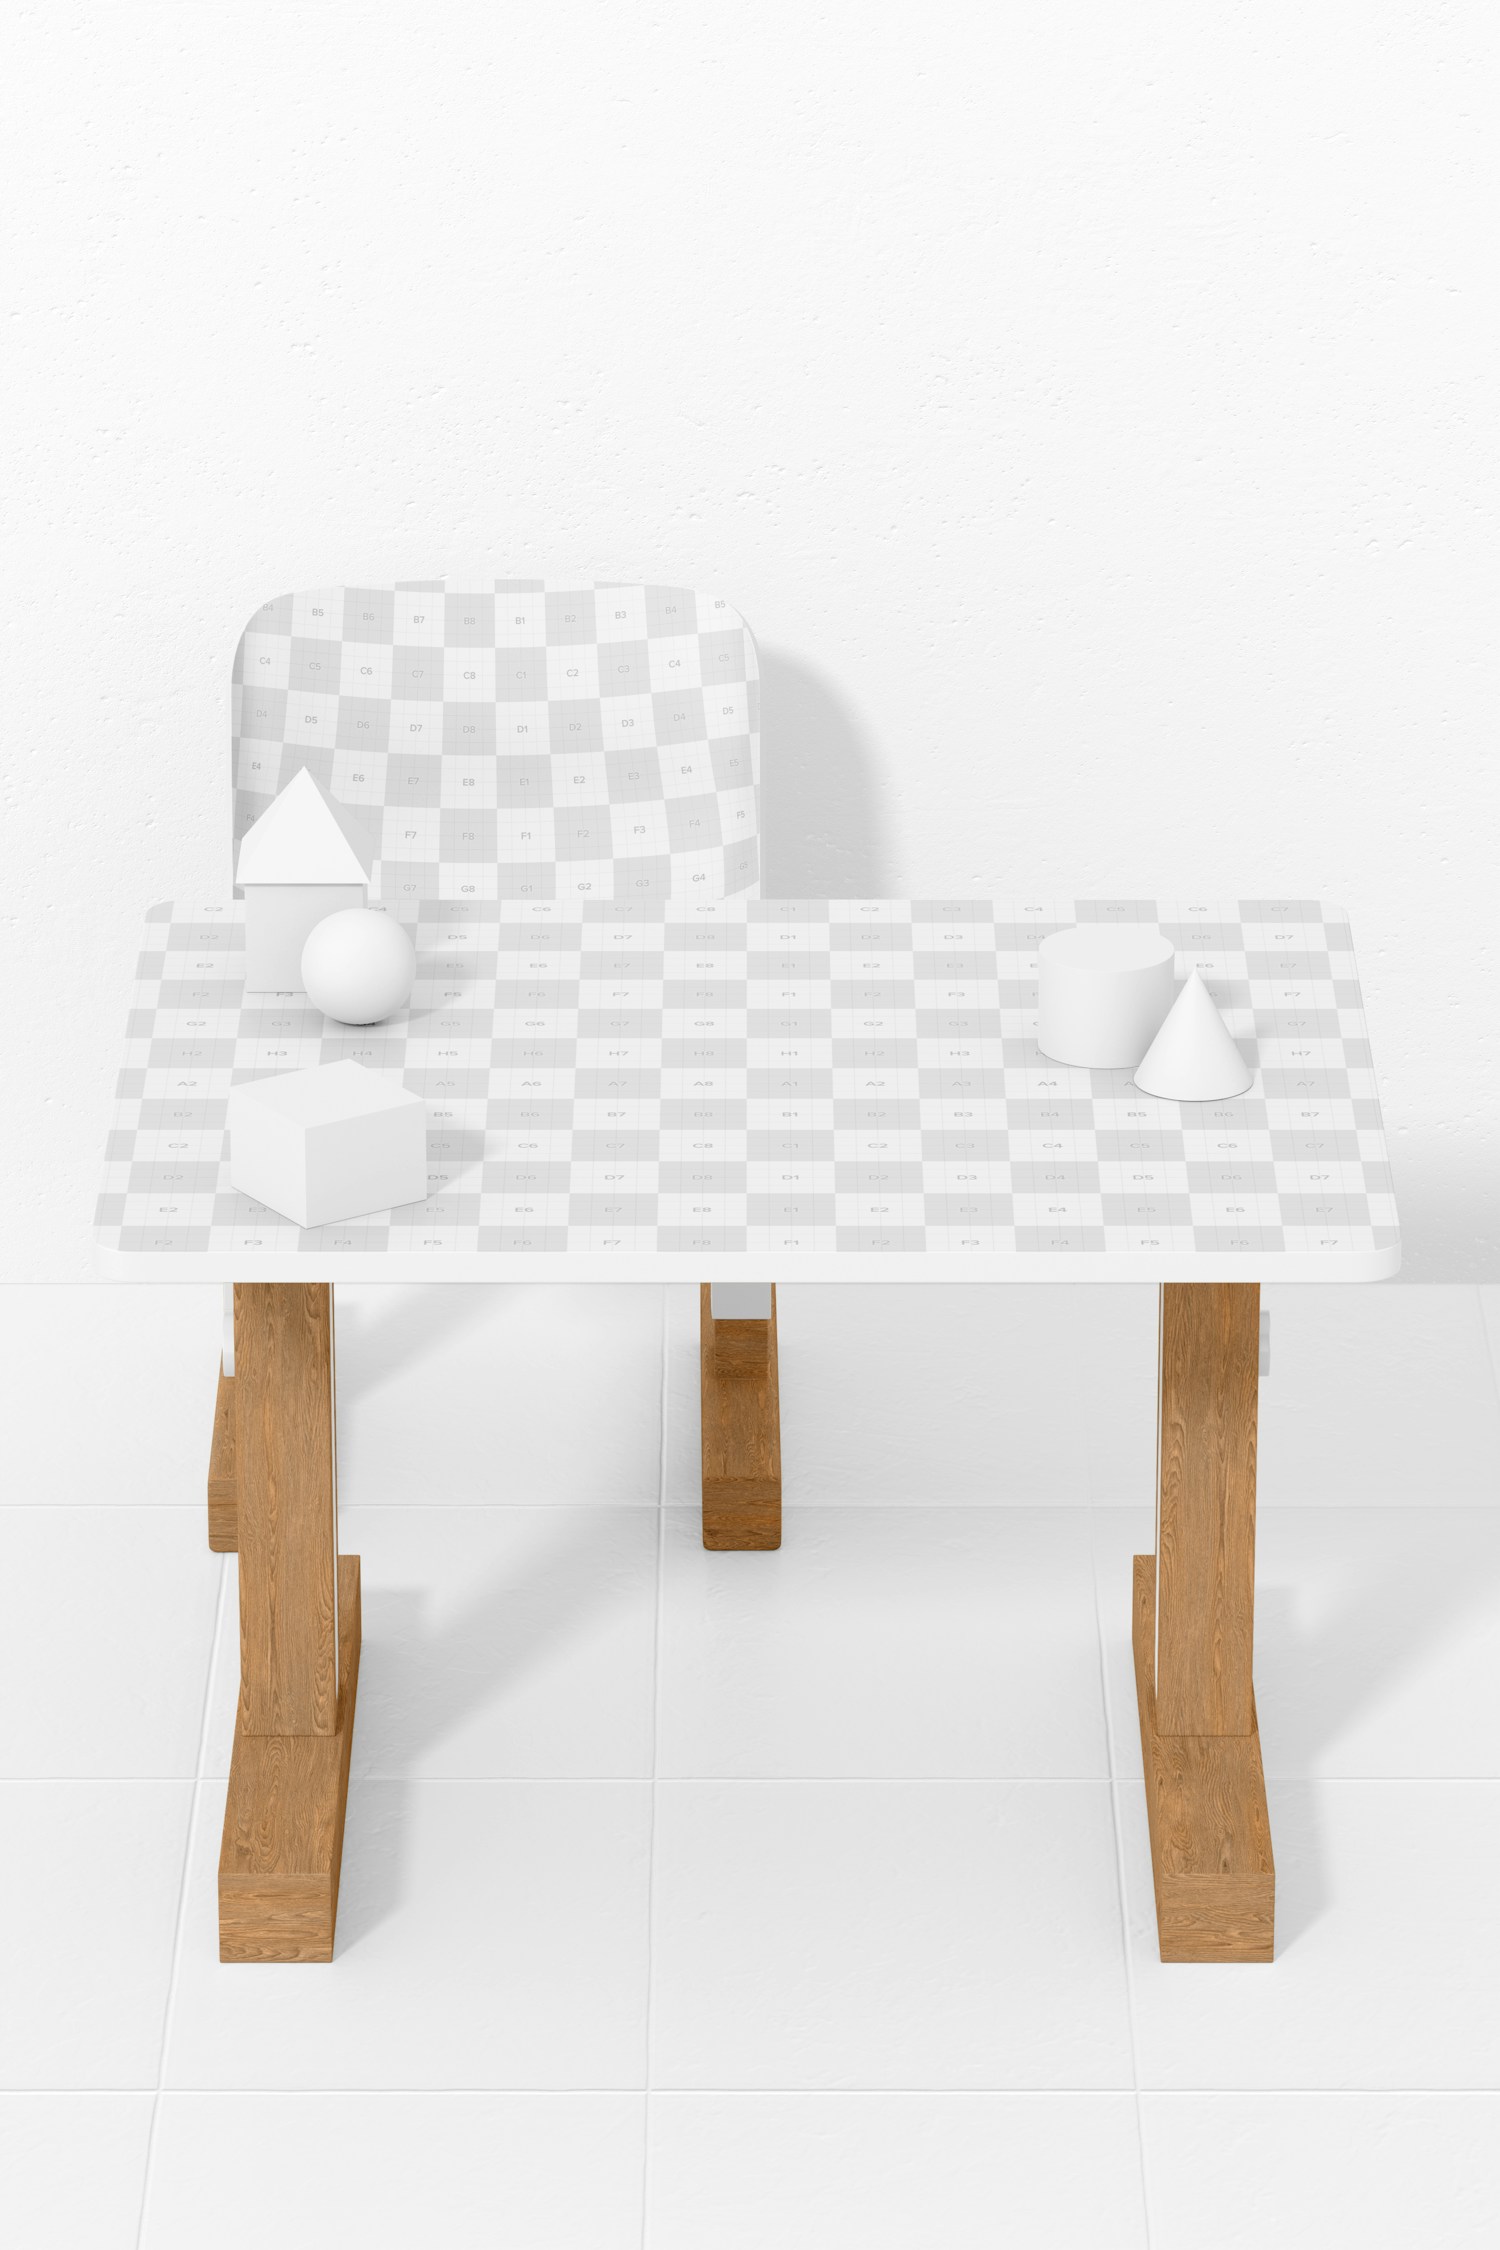 Kindergarten Table and Chair Mockup, with Toys